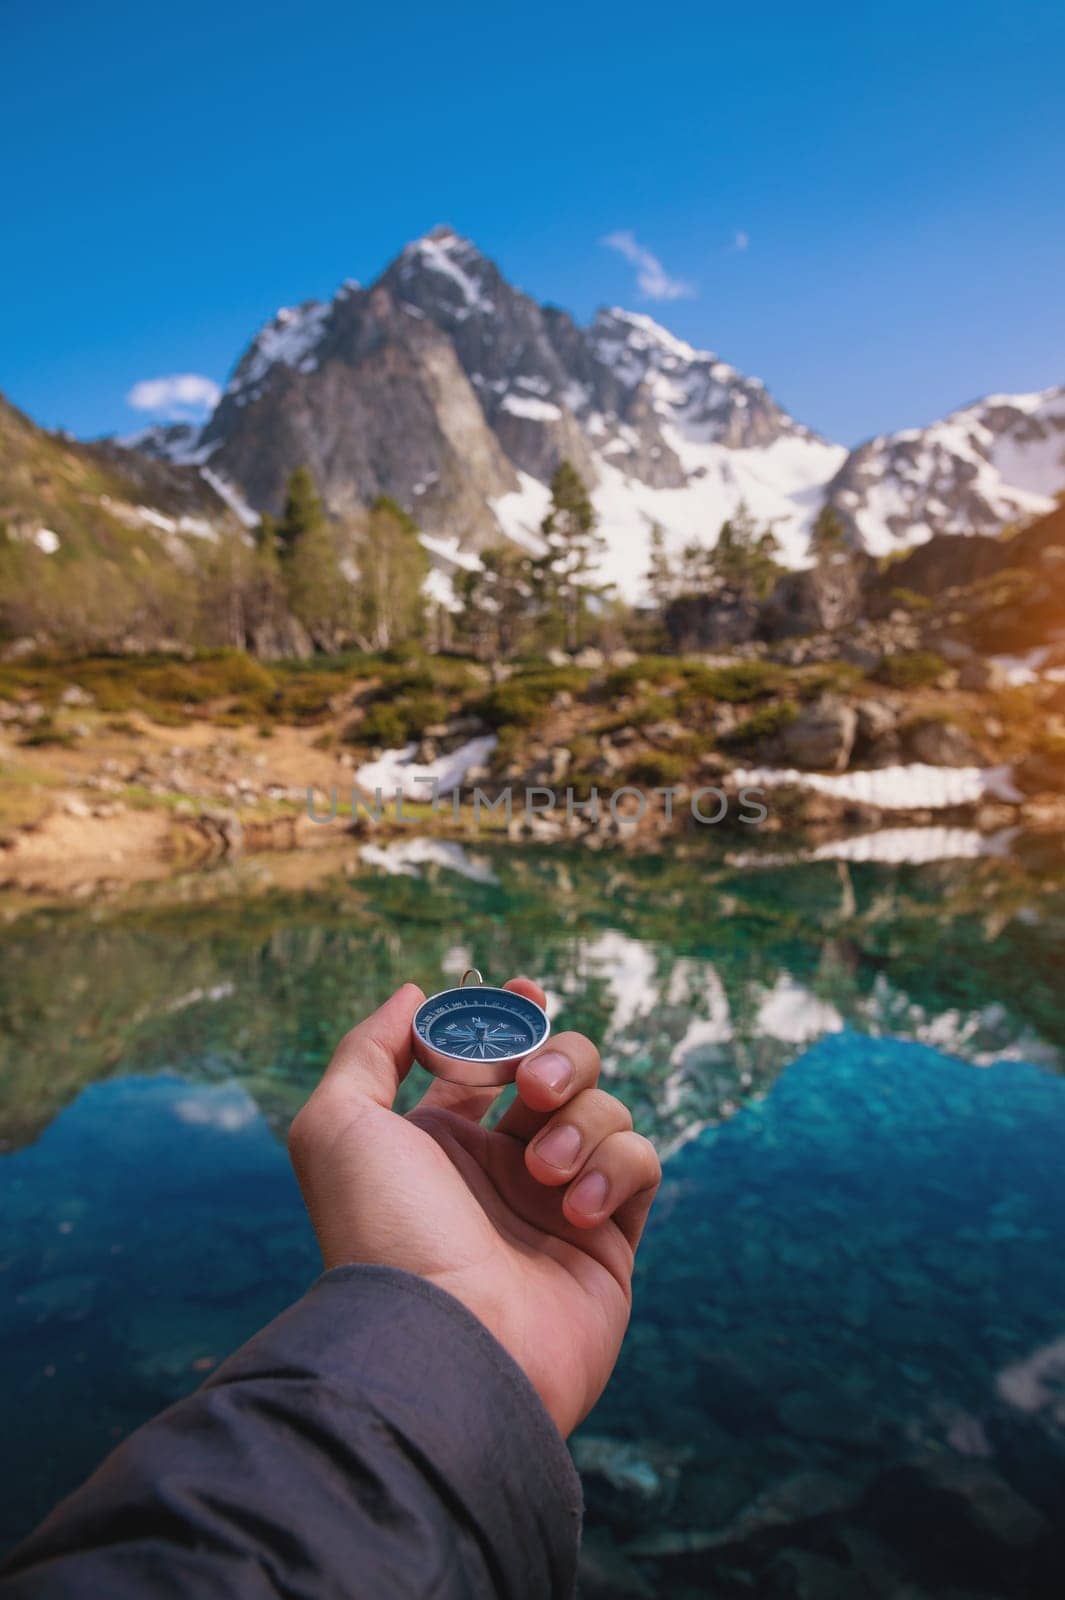 man with a compass in his hand in high mountains near a clean lake. Travel concept. Landscape photography by yanik88